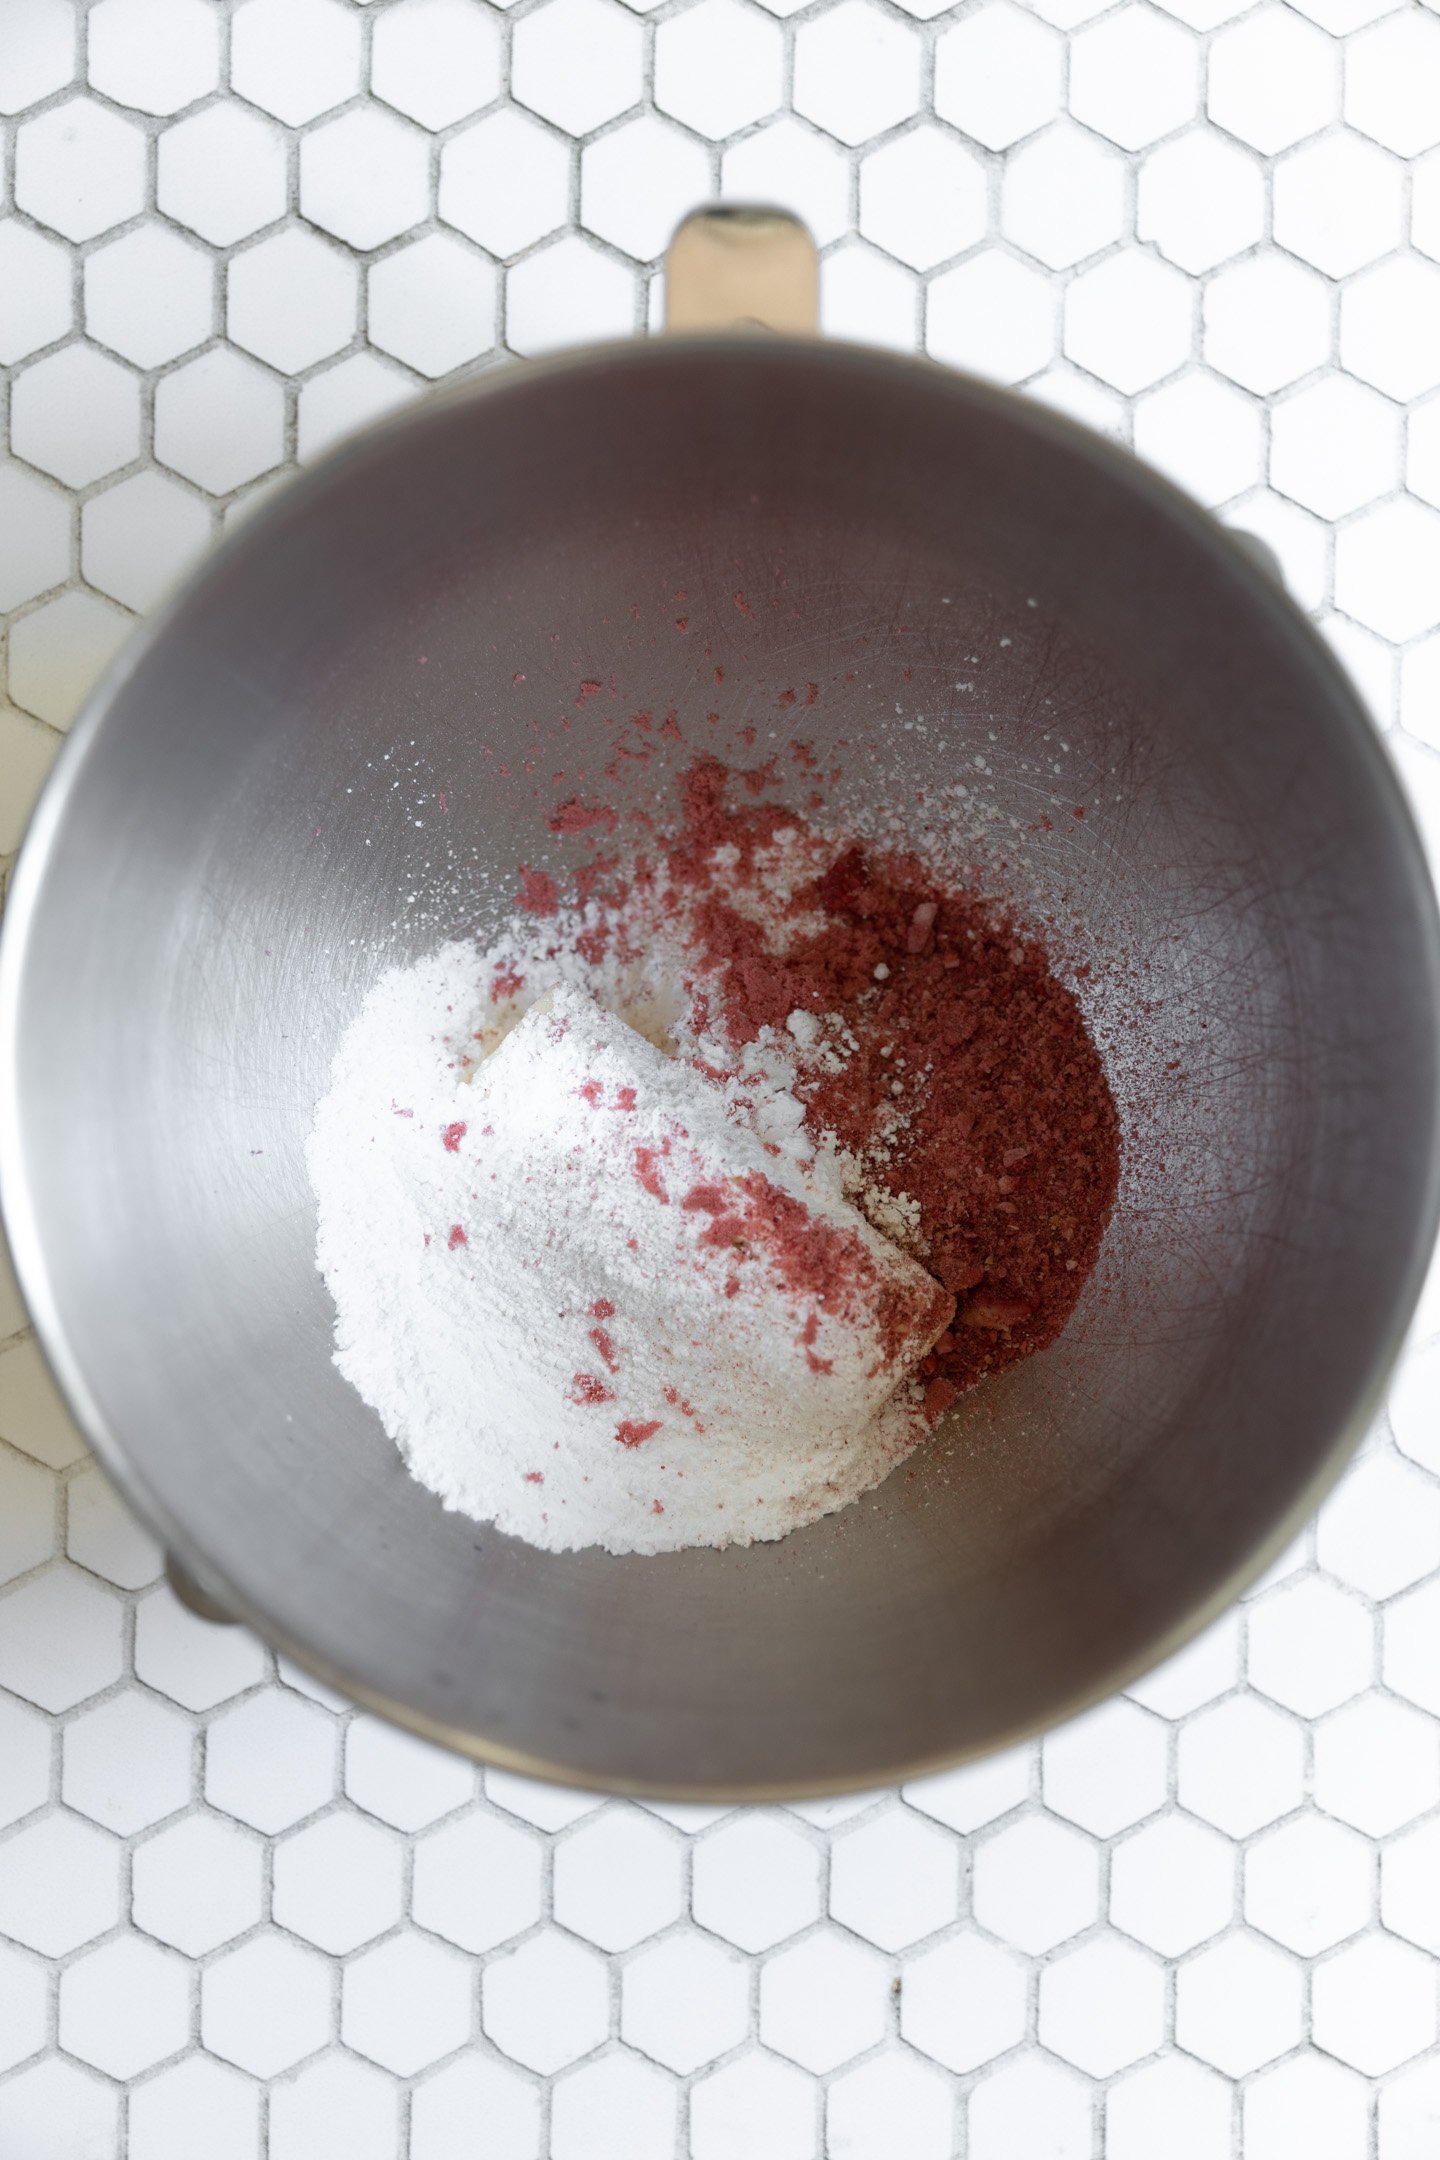 Powdered sugar and freeze dried strawberries in a bowl.